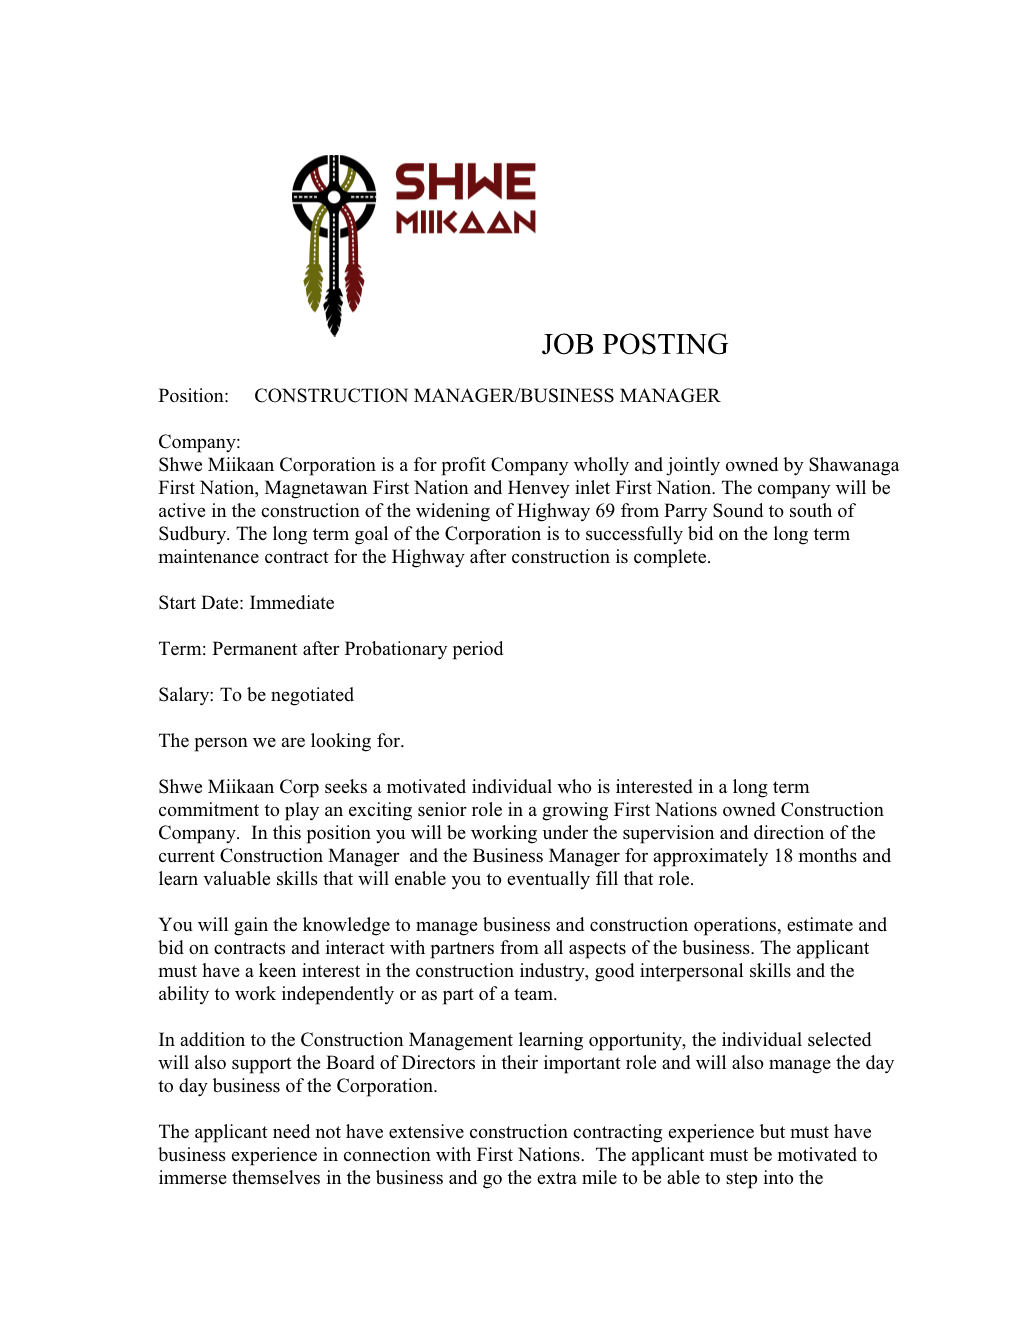 Position: CONSTRUCTION MANAGER/BUSINESS MANAGER